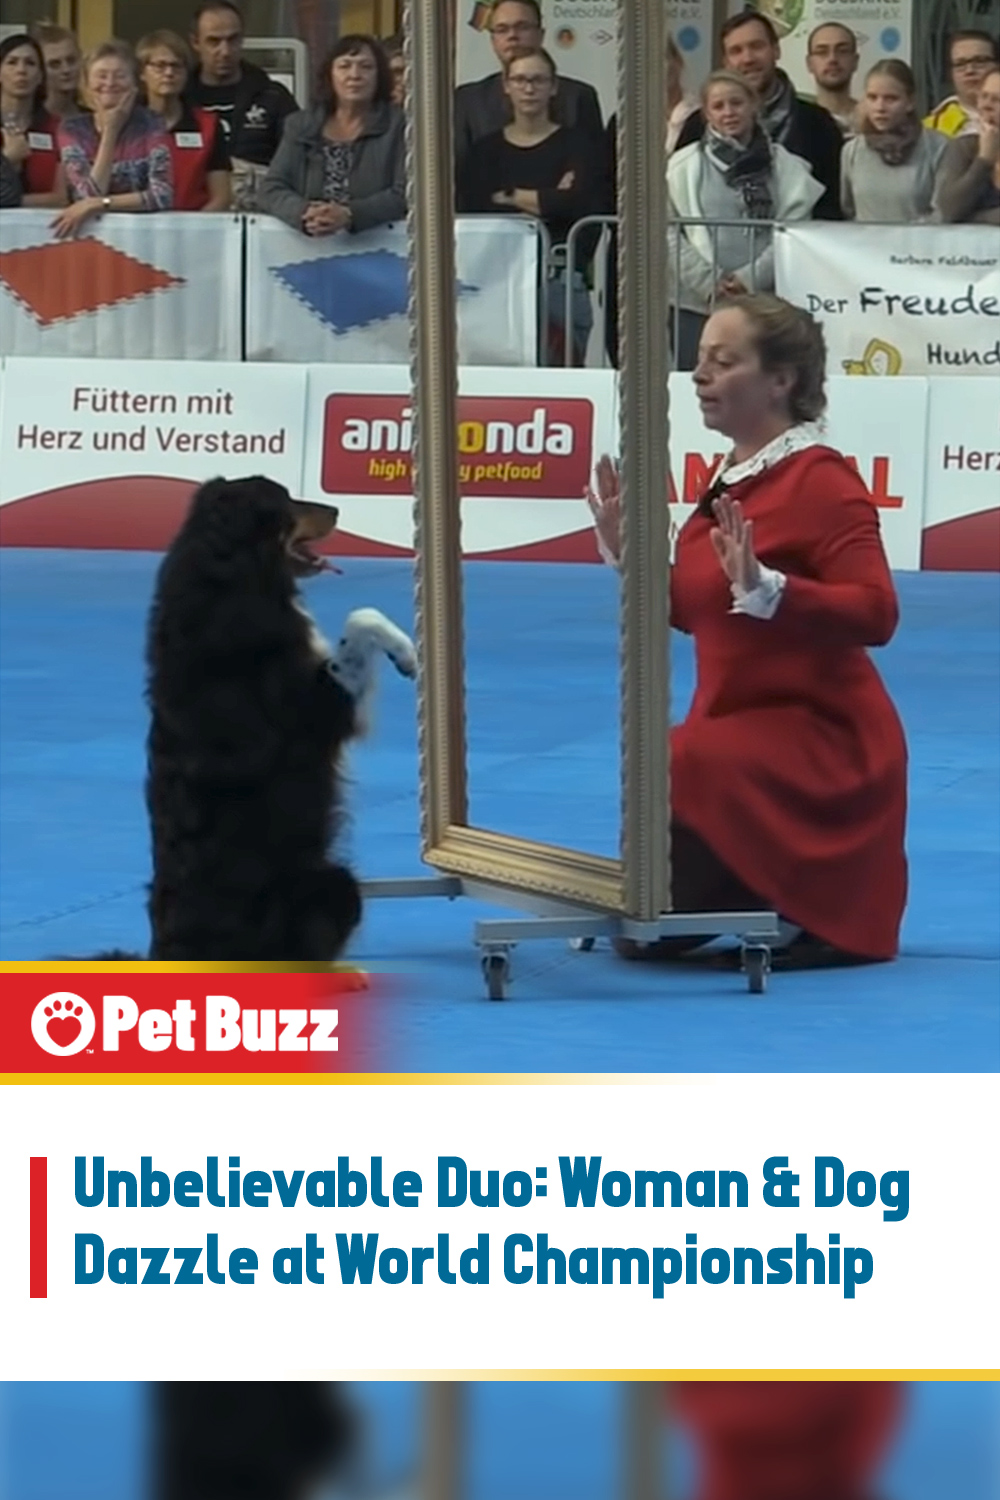 Unbelievable Duo: Woman & Dog Dazzle at World Championship